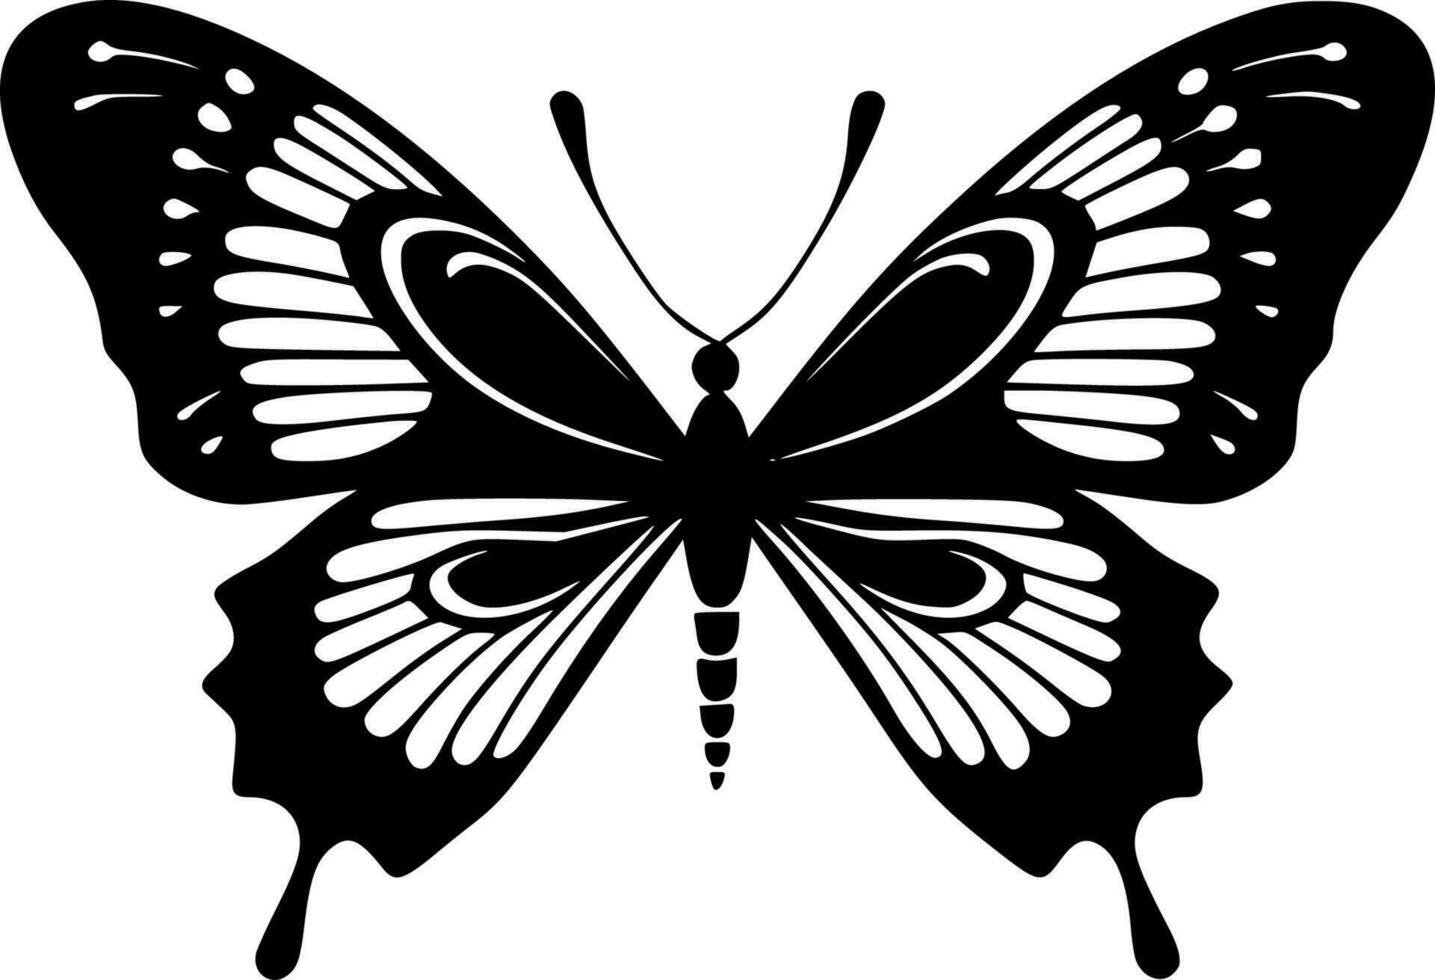 Butterflies, Minimalist and Simple Silhouette - Vector illustration